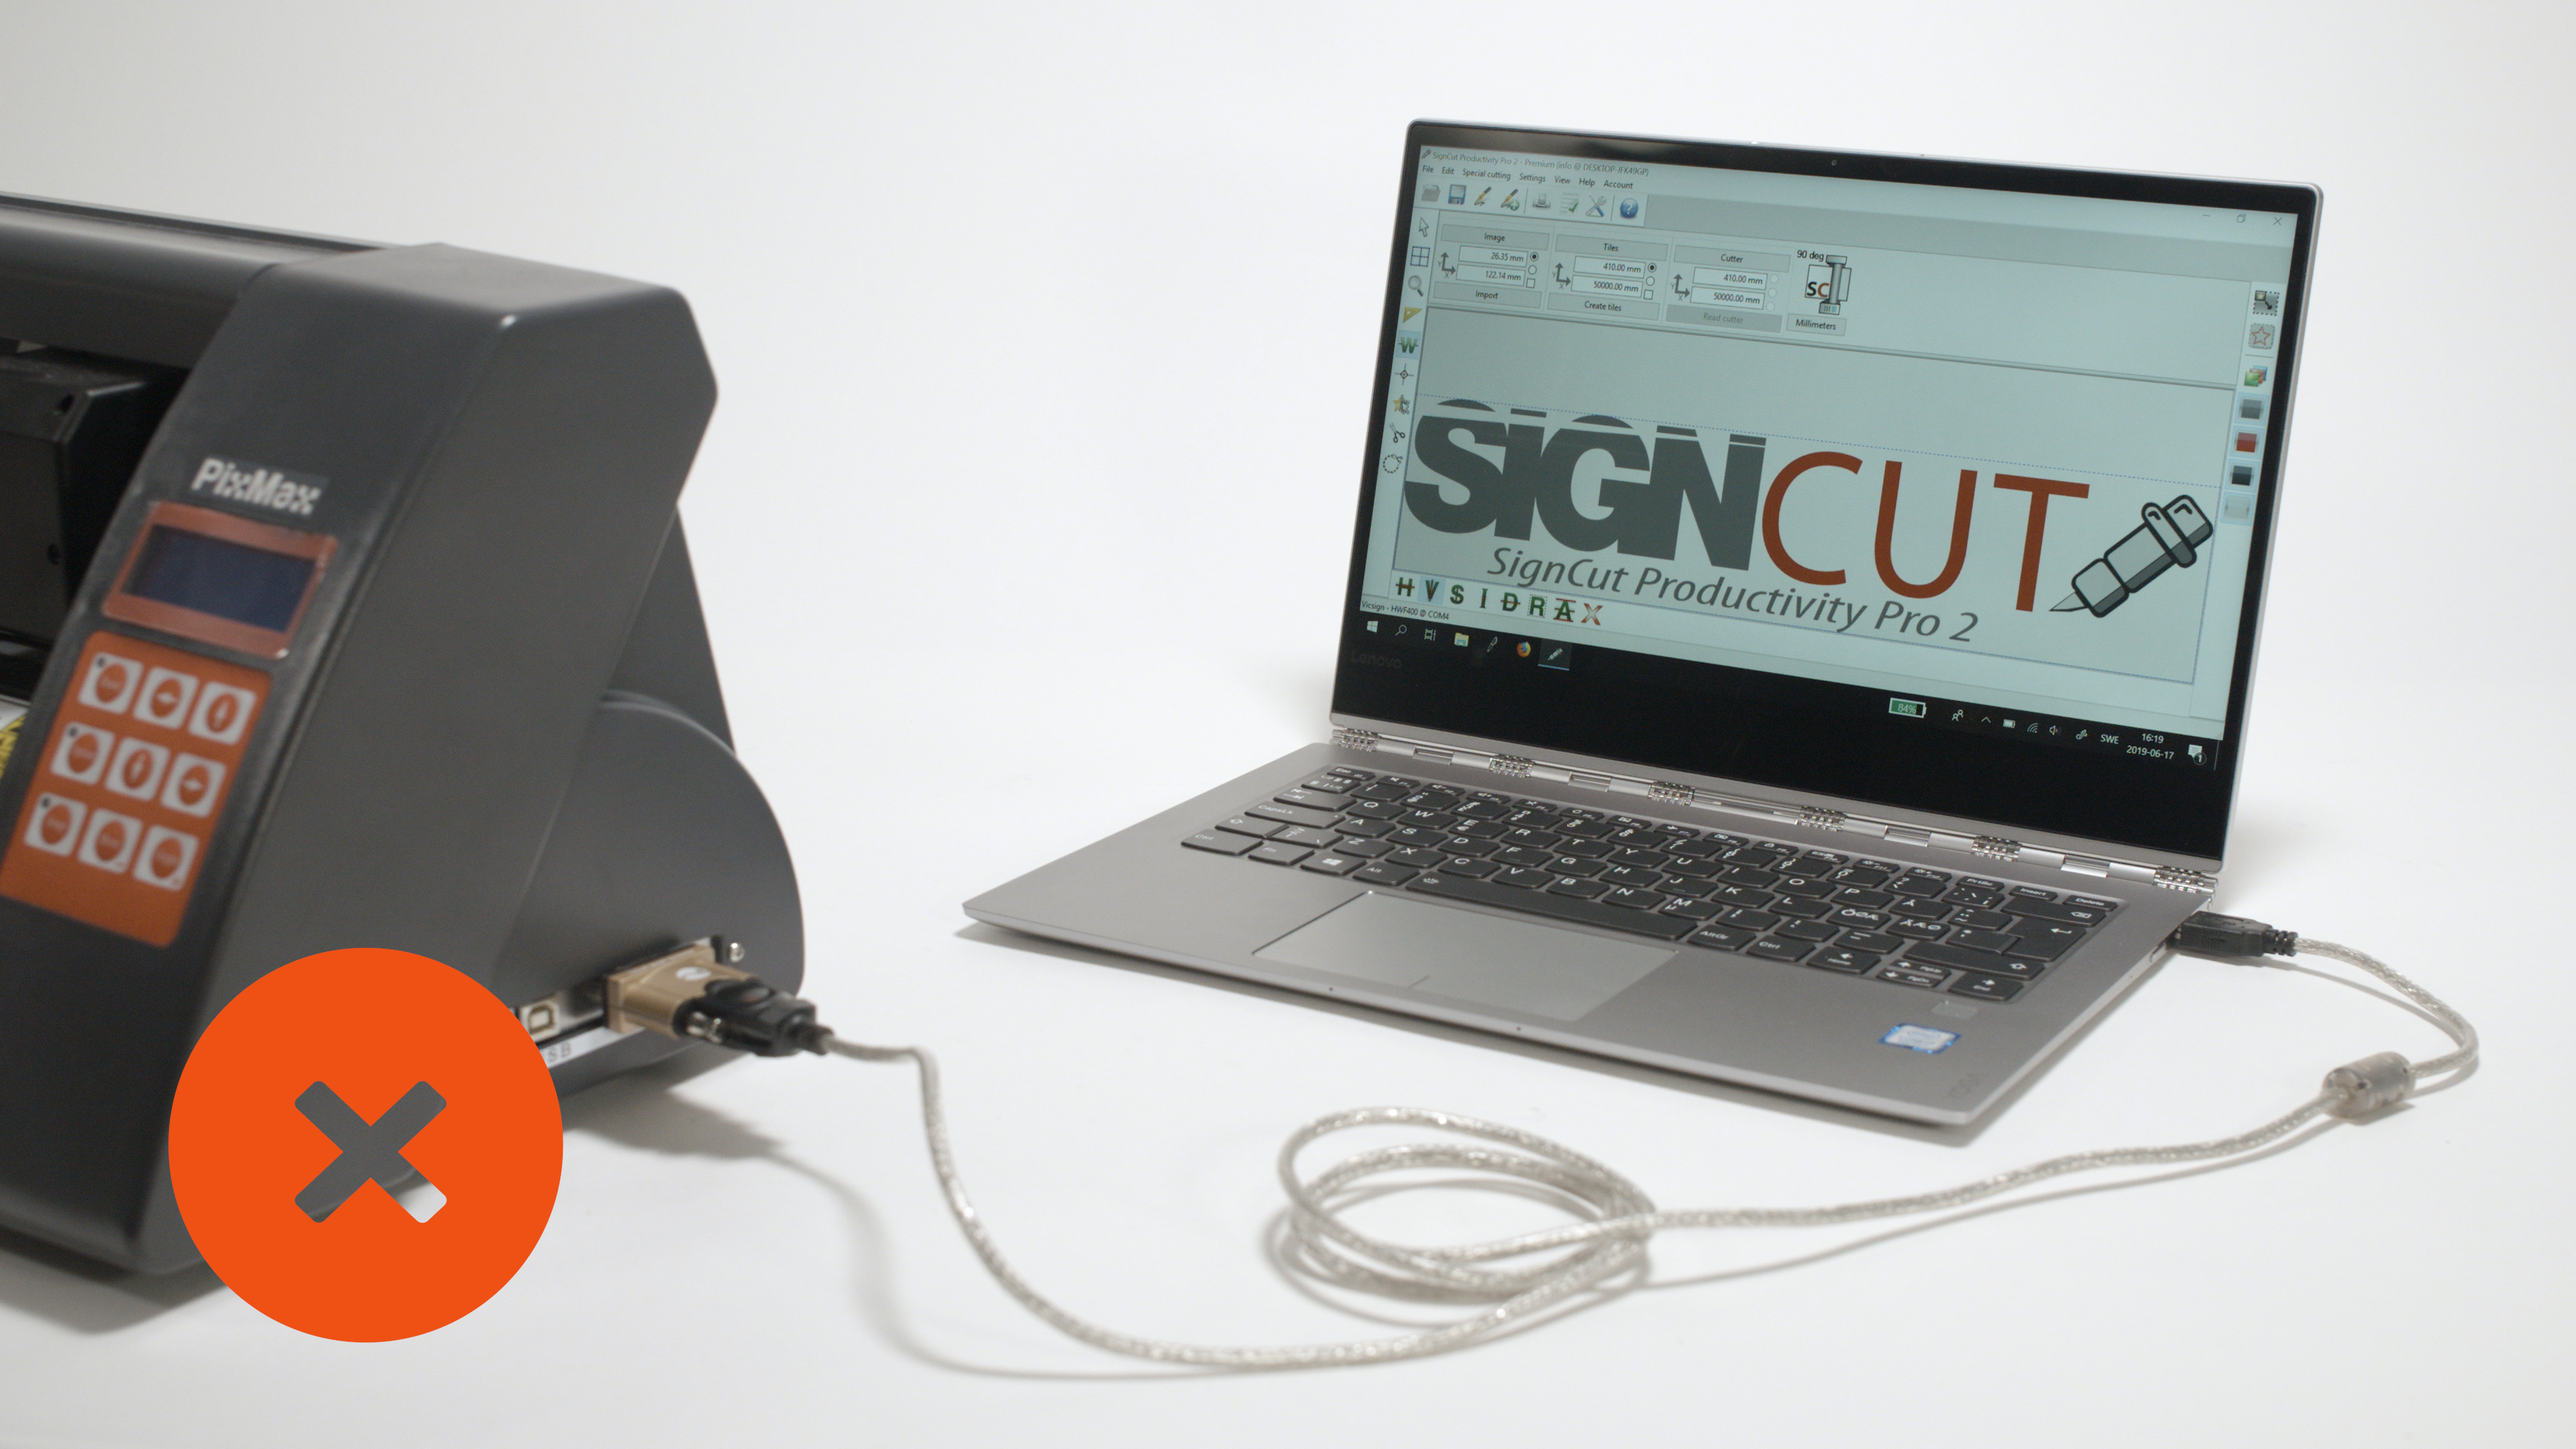 signcut pro 1 install on another pc